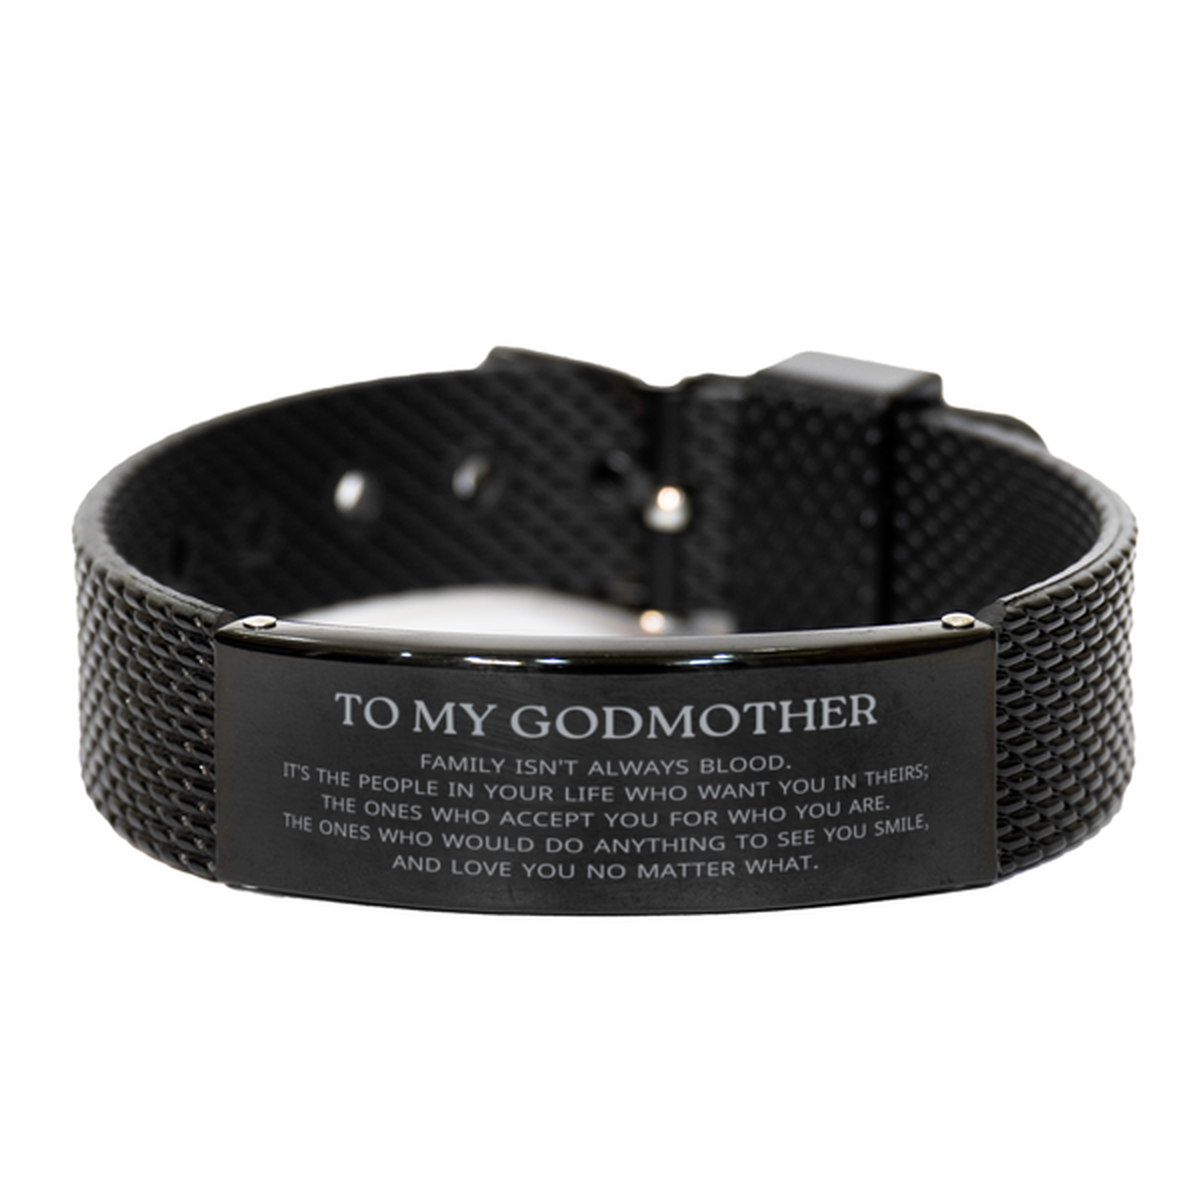 To My Godmother Gifts, Family isn't always blood, Godmother Black Shark Mesh Bracelet, Birthday Christmas Unique Present For Godmother